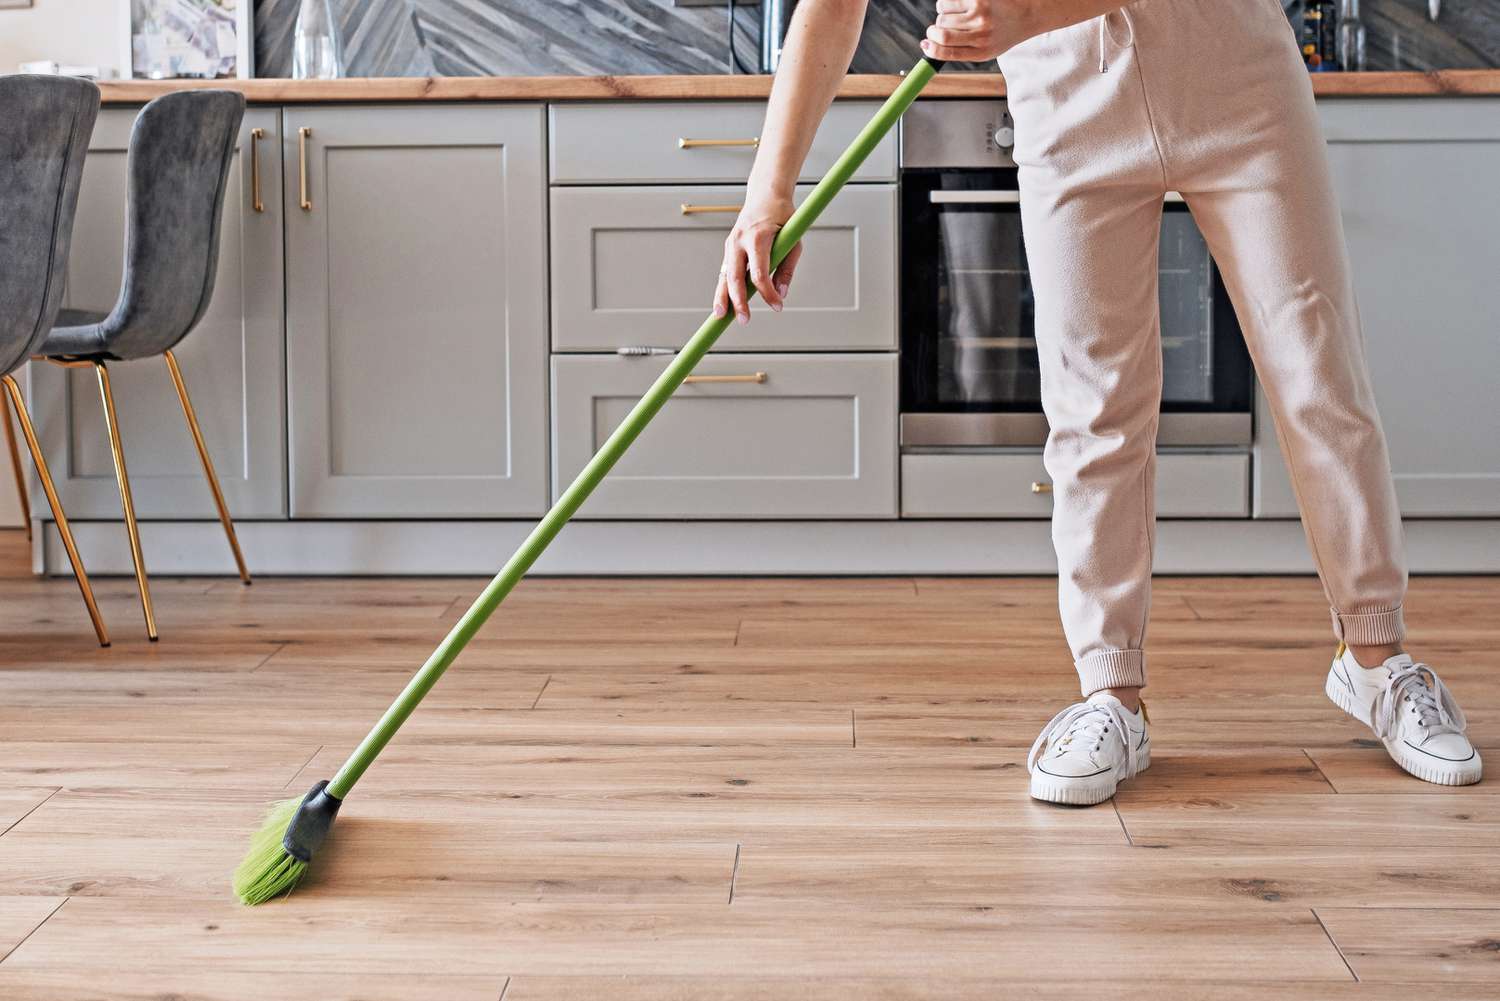 Wooden floors being sweep with a green broom in kitchen with gray cabinets